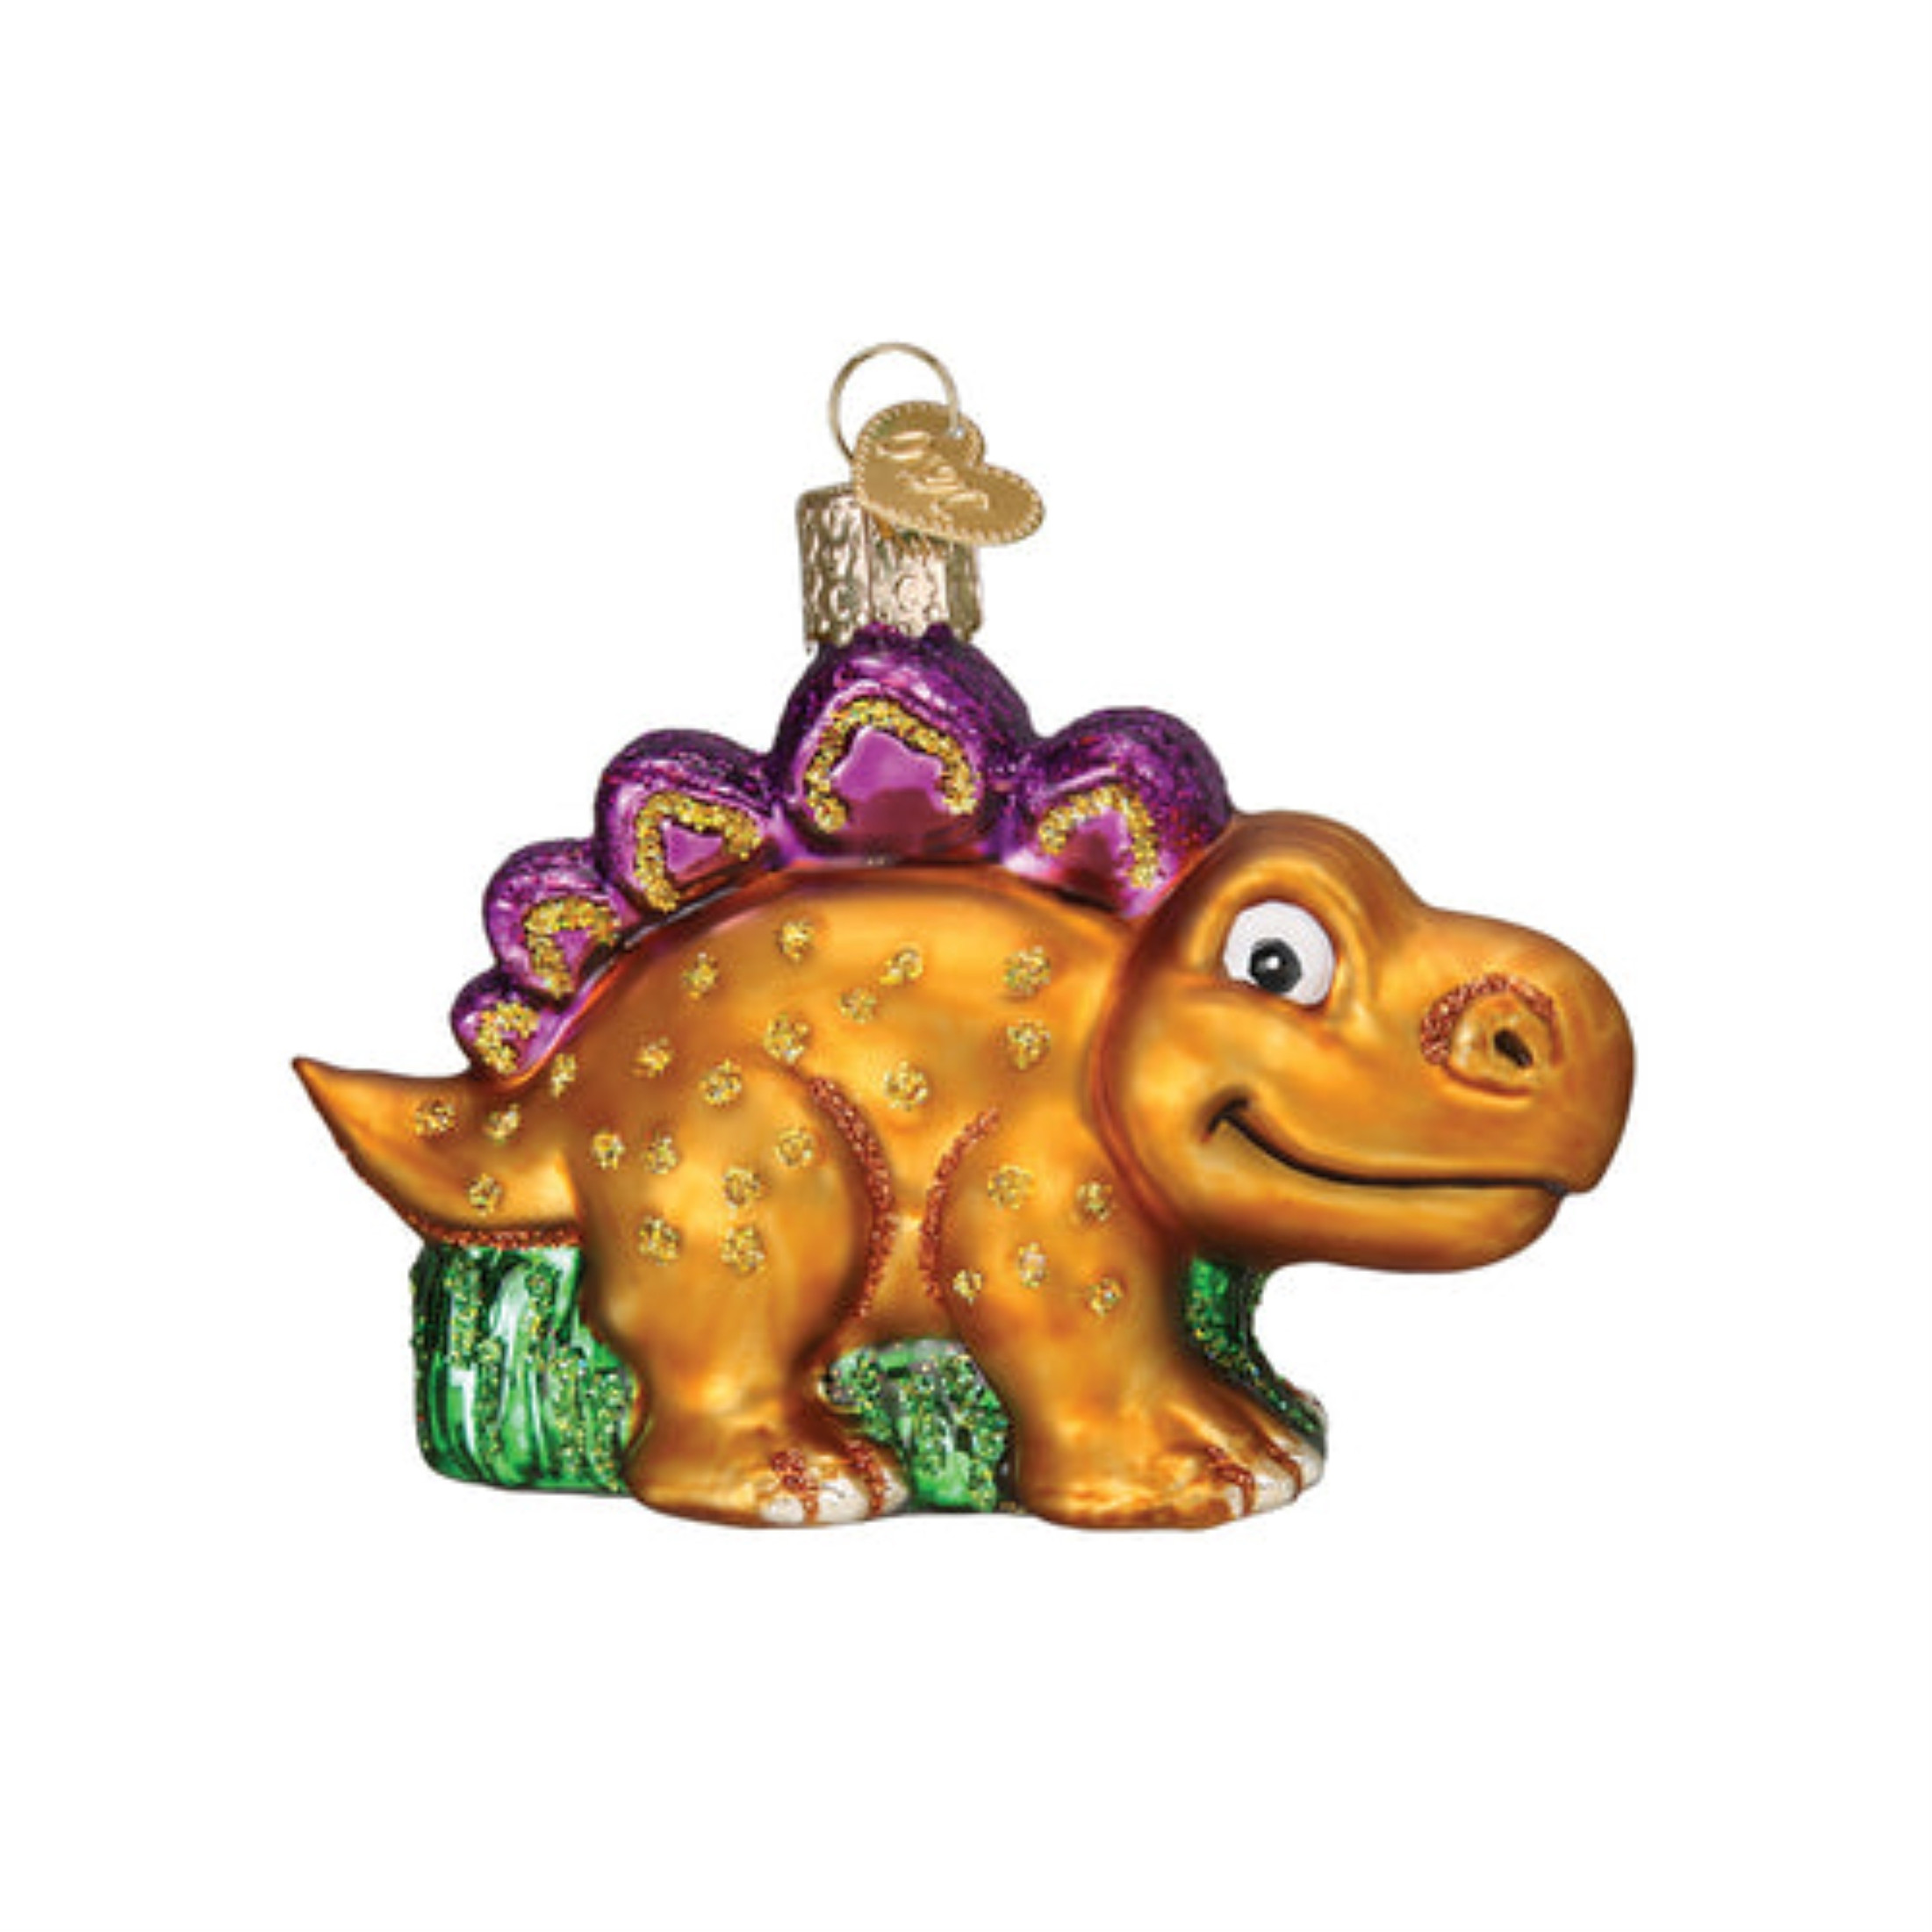 Old World Christmas Glass Blown Ornament, A Roarable Stegosaurus, 3.75" (With OWC Gift Box)